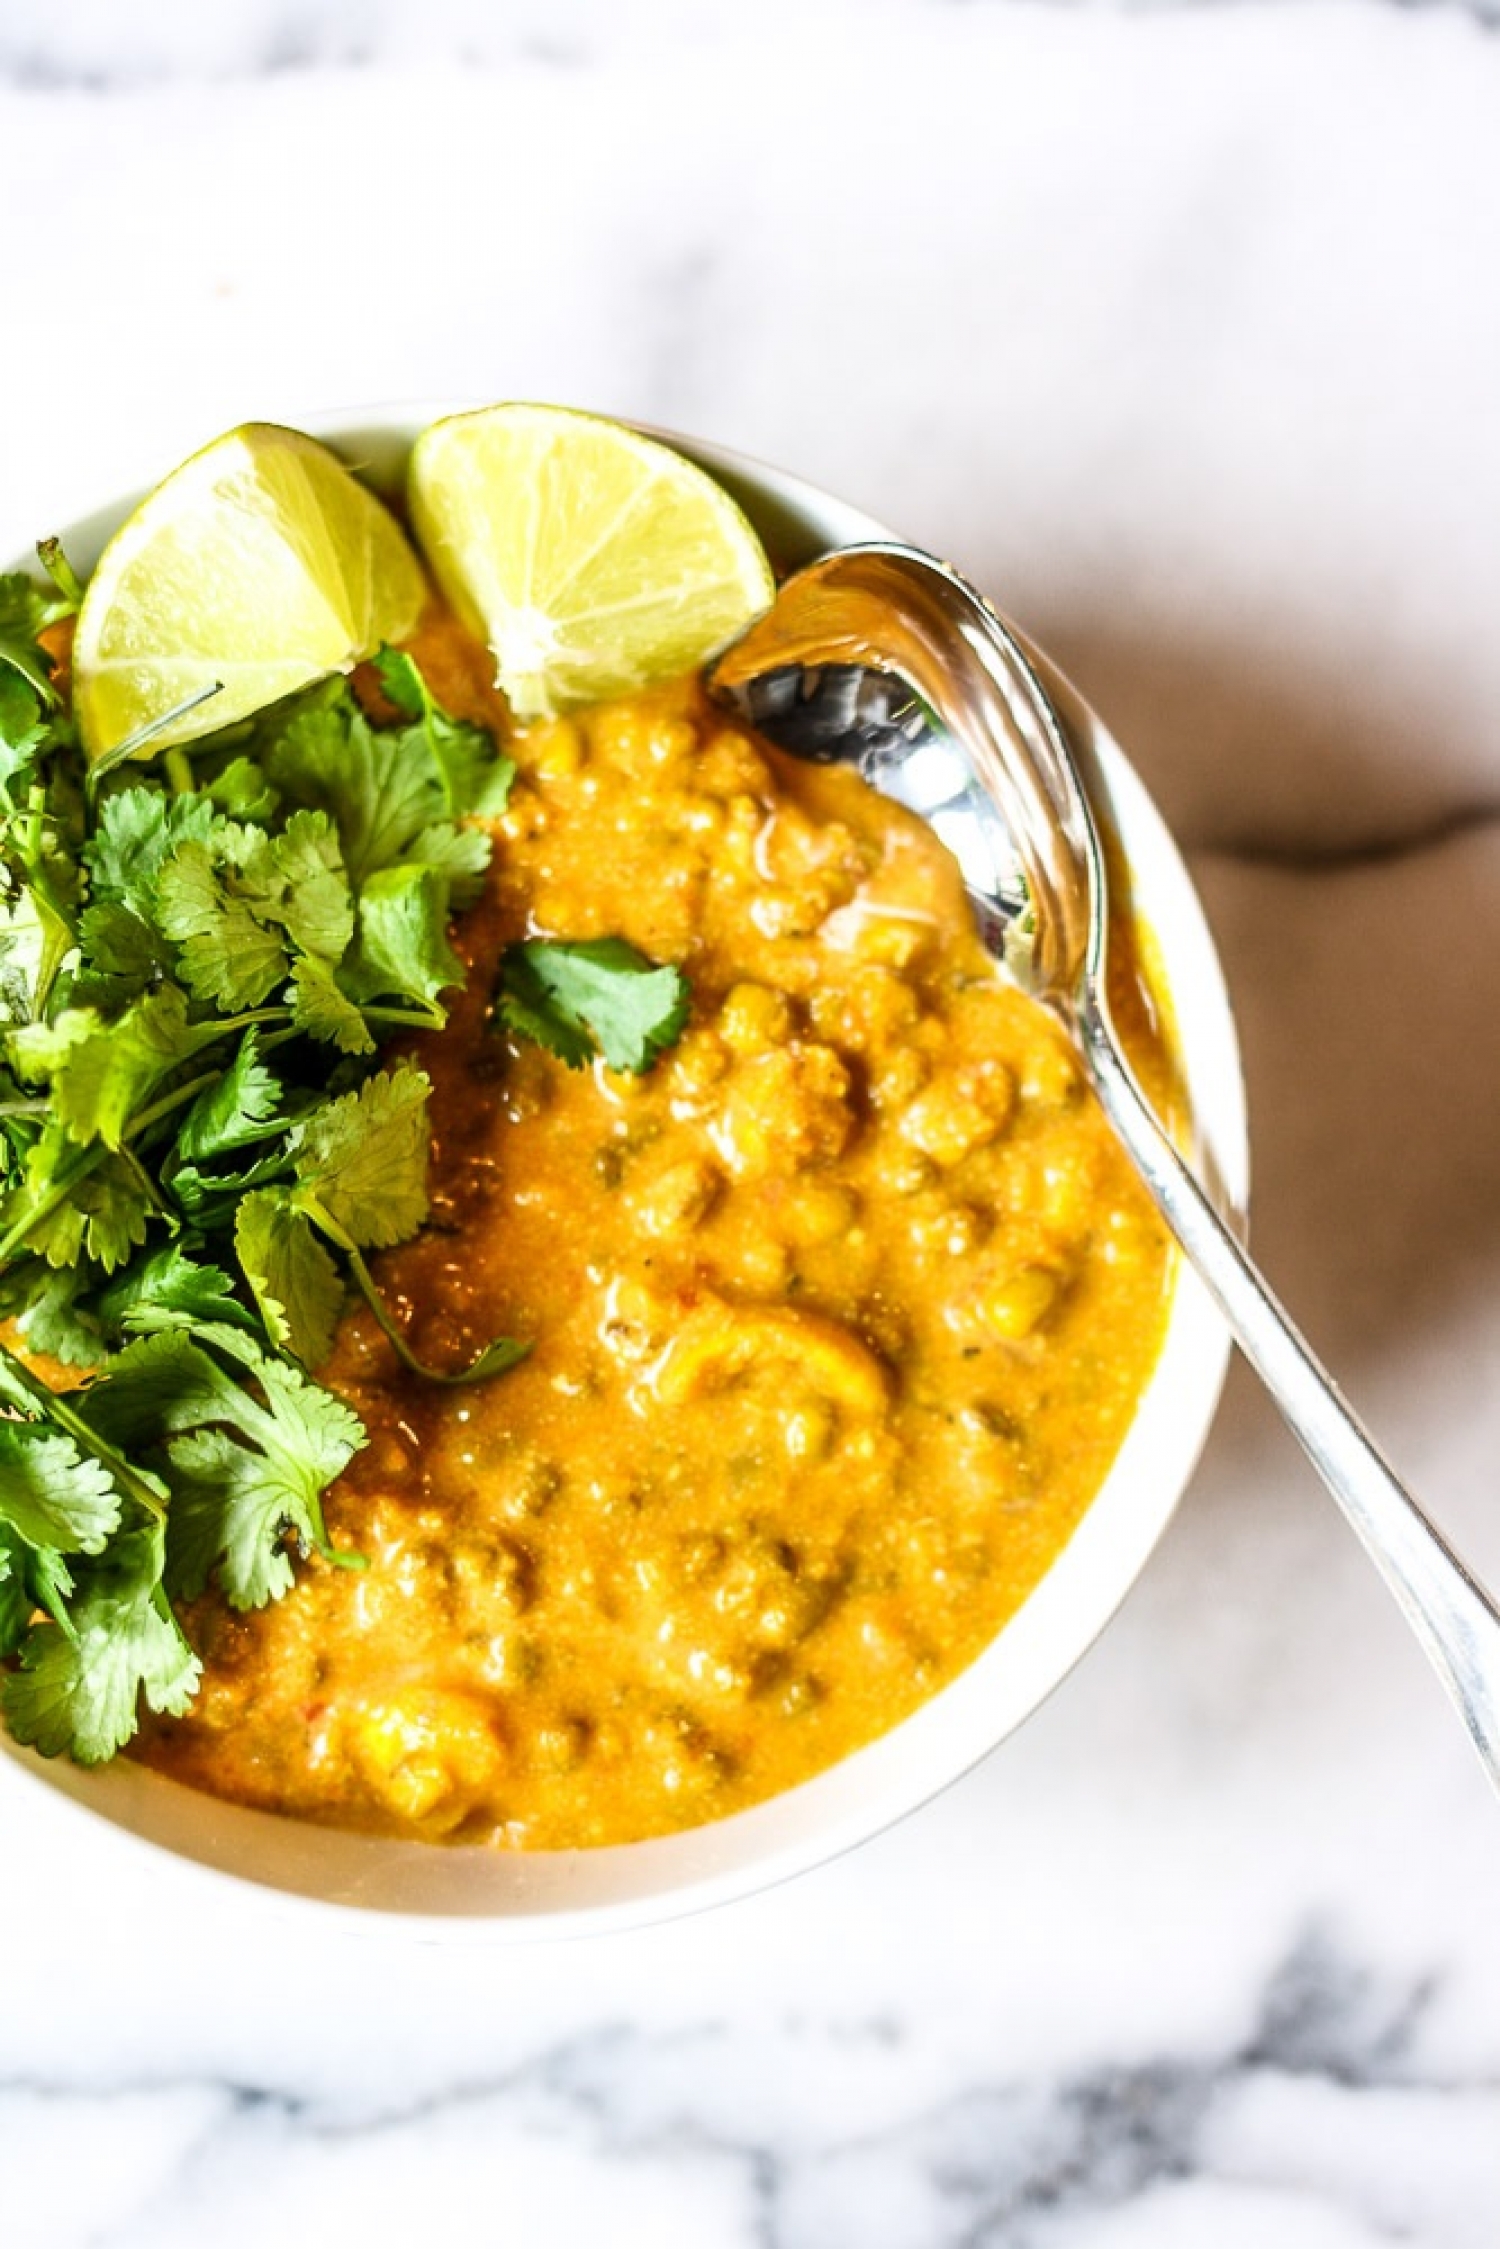 <p>You can never have too many curry dishes in your dinner rotation, now can you? <a href="https://kitchenofyouth.com/mung-bean-coconut-curry/" rel="noopener">This recipe</a> opts for easy-to-cook dried mung beans in a delectably creamy and garlicky sauce that will make your kitchen smell divine.</p>